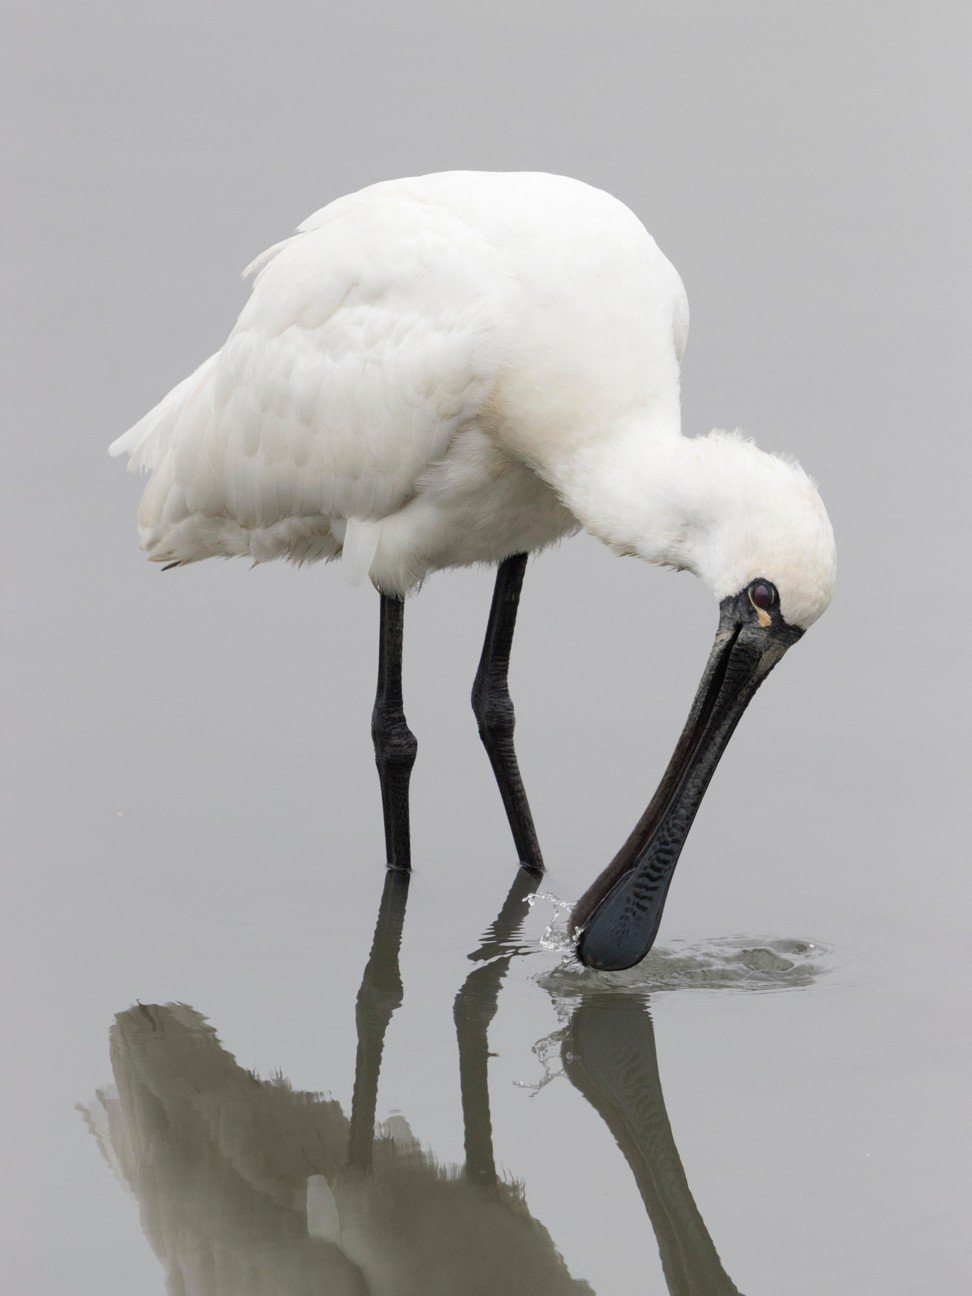 A black-faced spoonbill preening in the water in Hong Kong’s Nam Sang Wai wetland area. Photo: Alamy